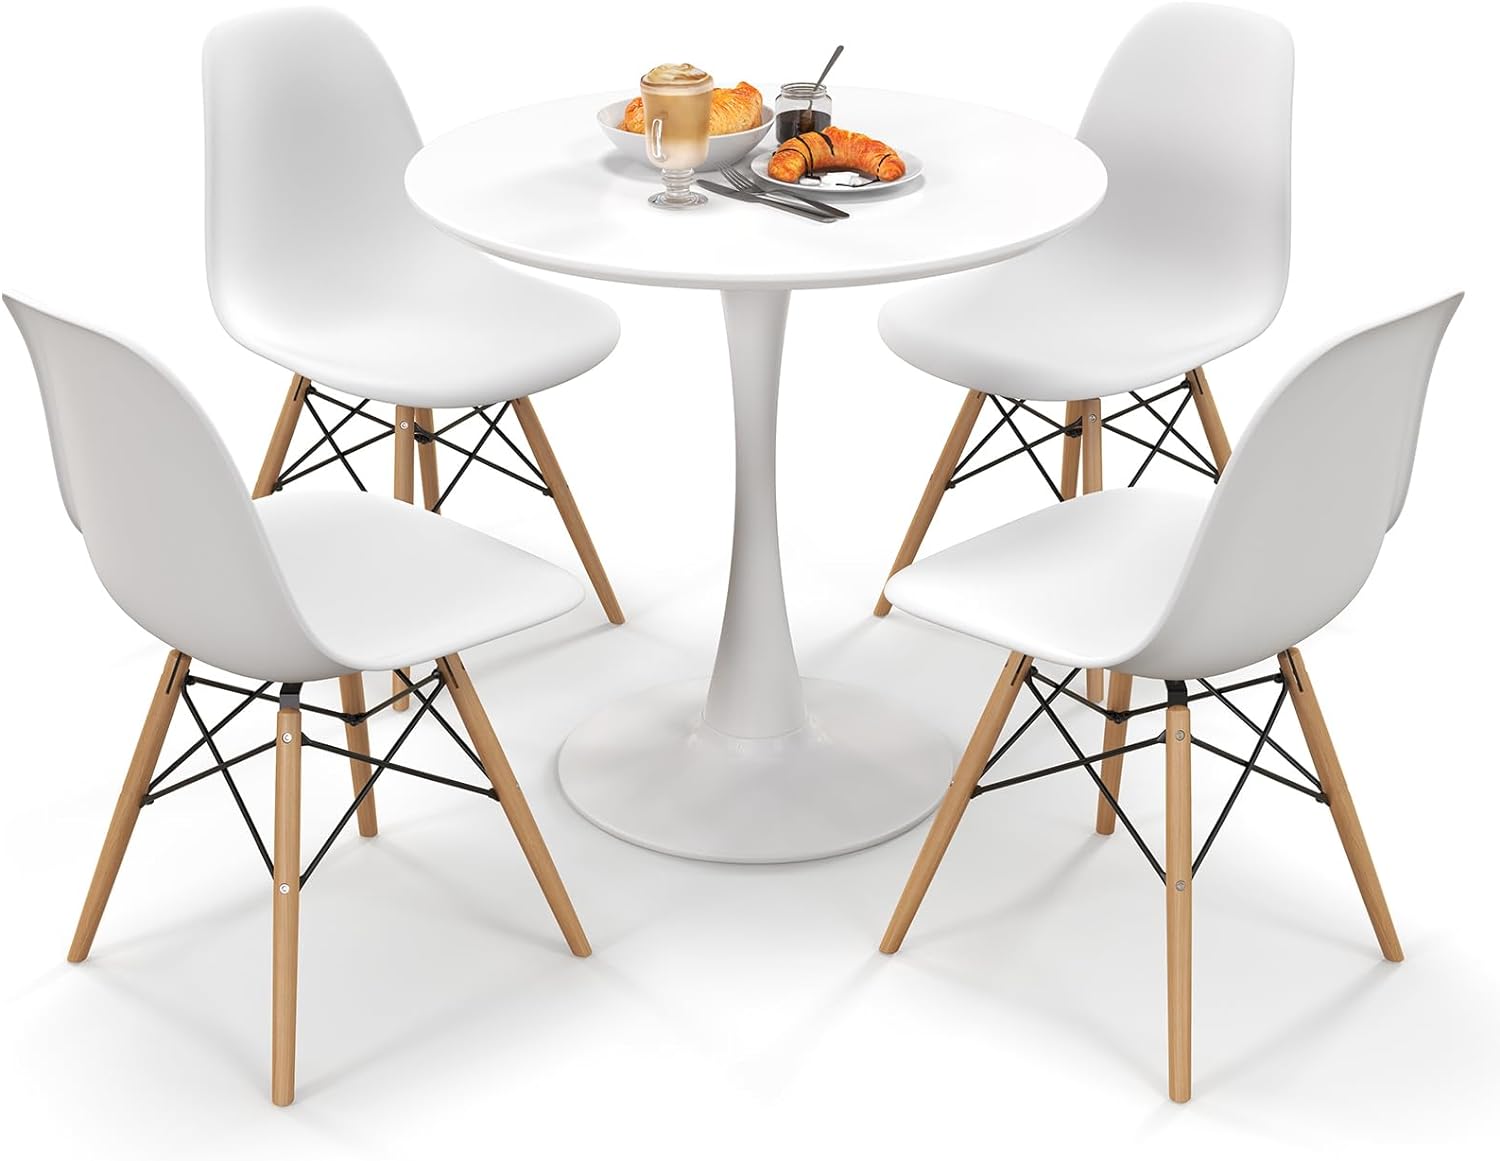 Giantex Dining Room Table Set for 2 or 4, Compact Kitchen Dining Table Set with 32" Round Table and DSW Chairs